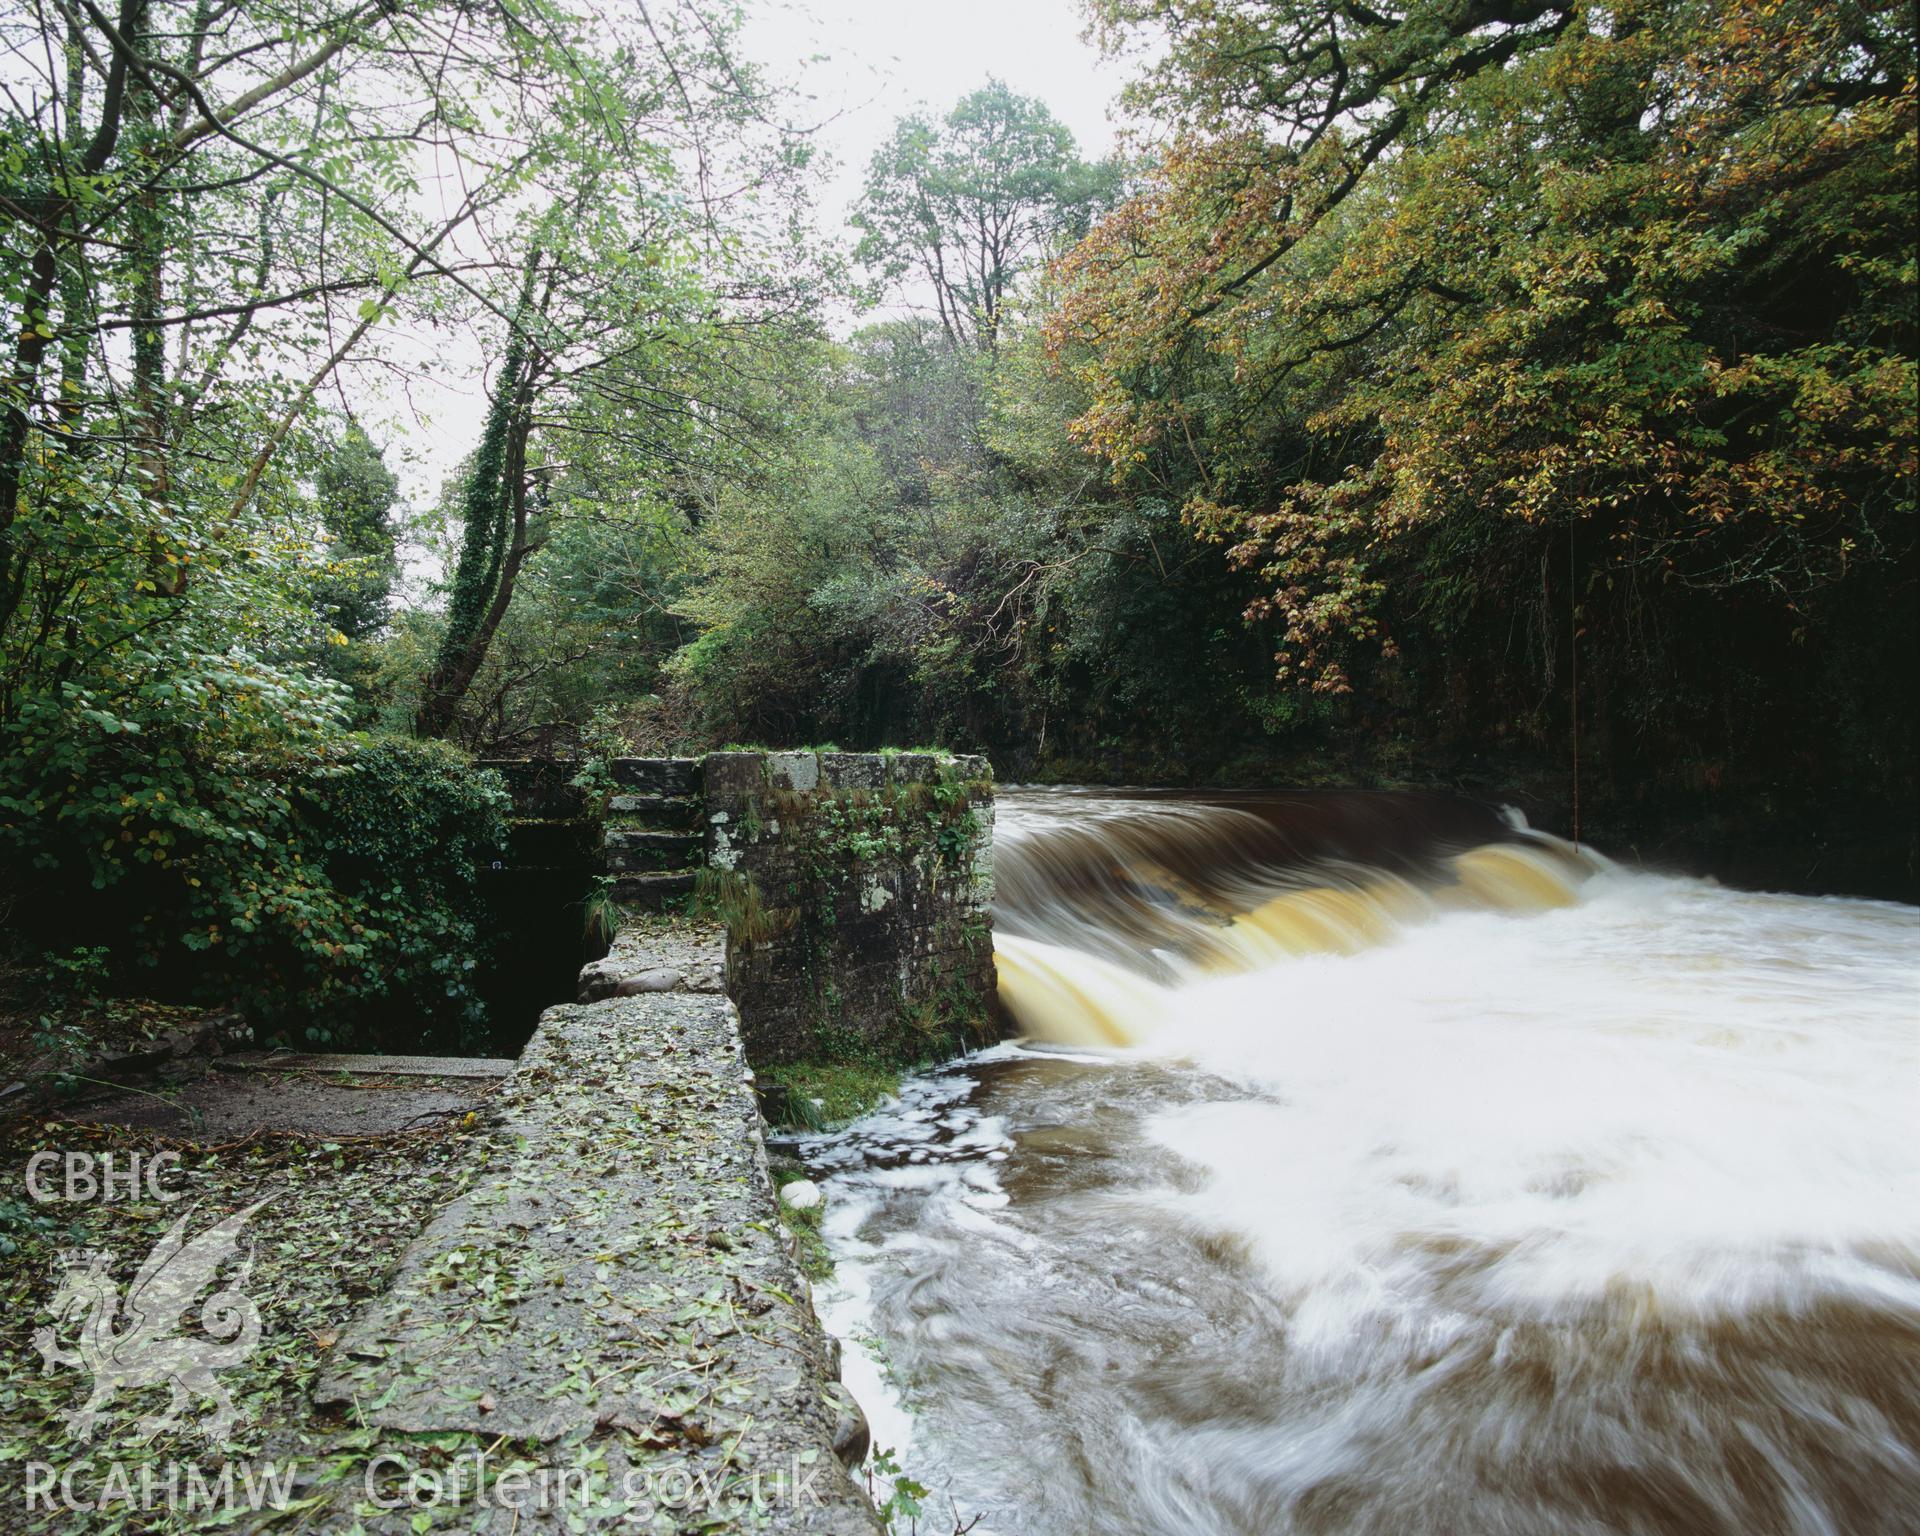 RCAHMW colour transparency showing view of the Abercraf feeder weir on the Swansea Canal, taken by I.N. Wright, October 2005